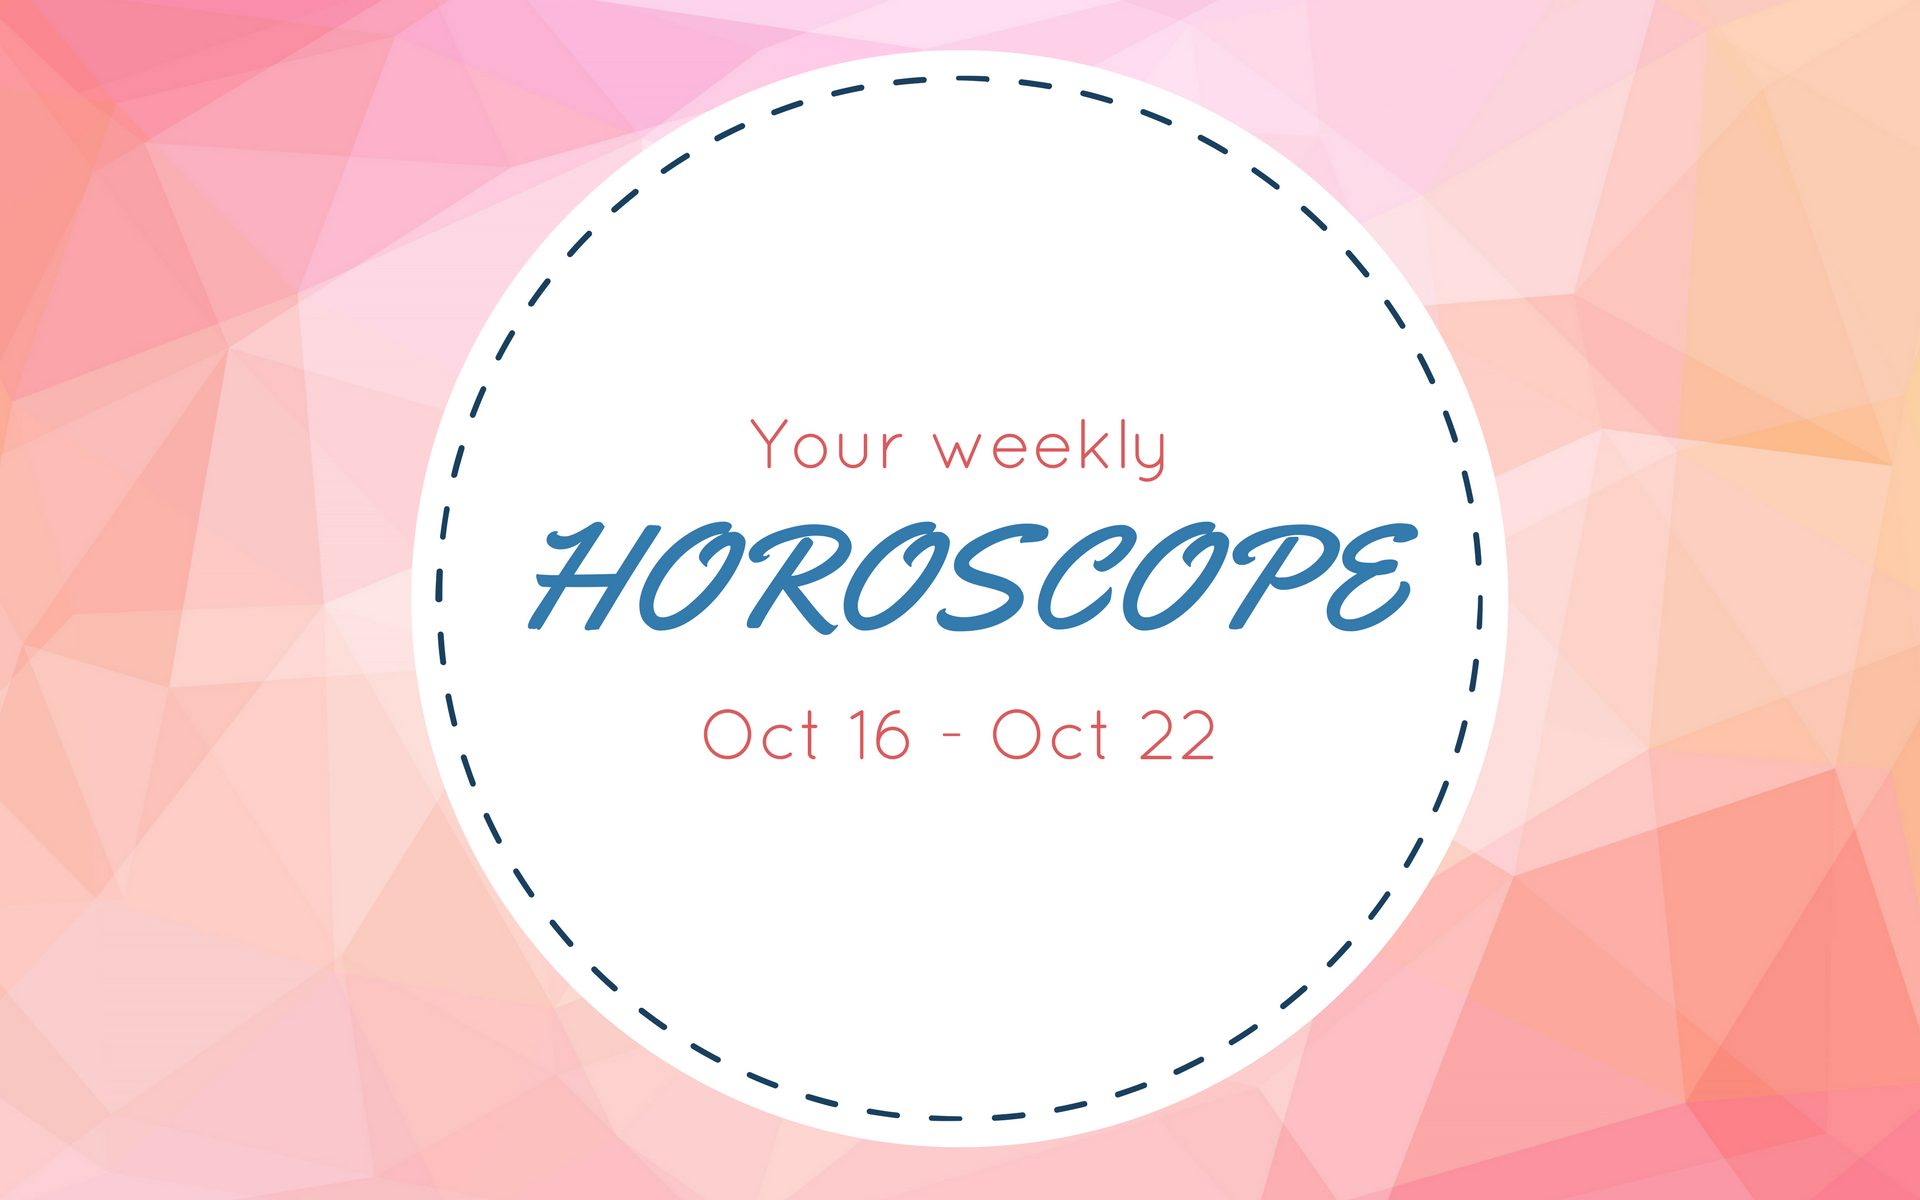 Your Weekly Horoscope: Oct 16 - Oct 22